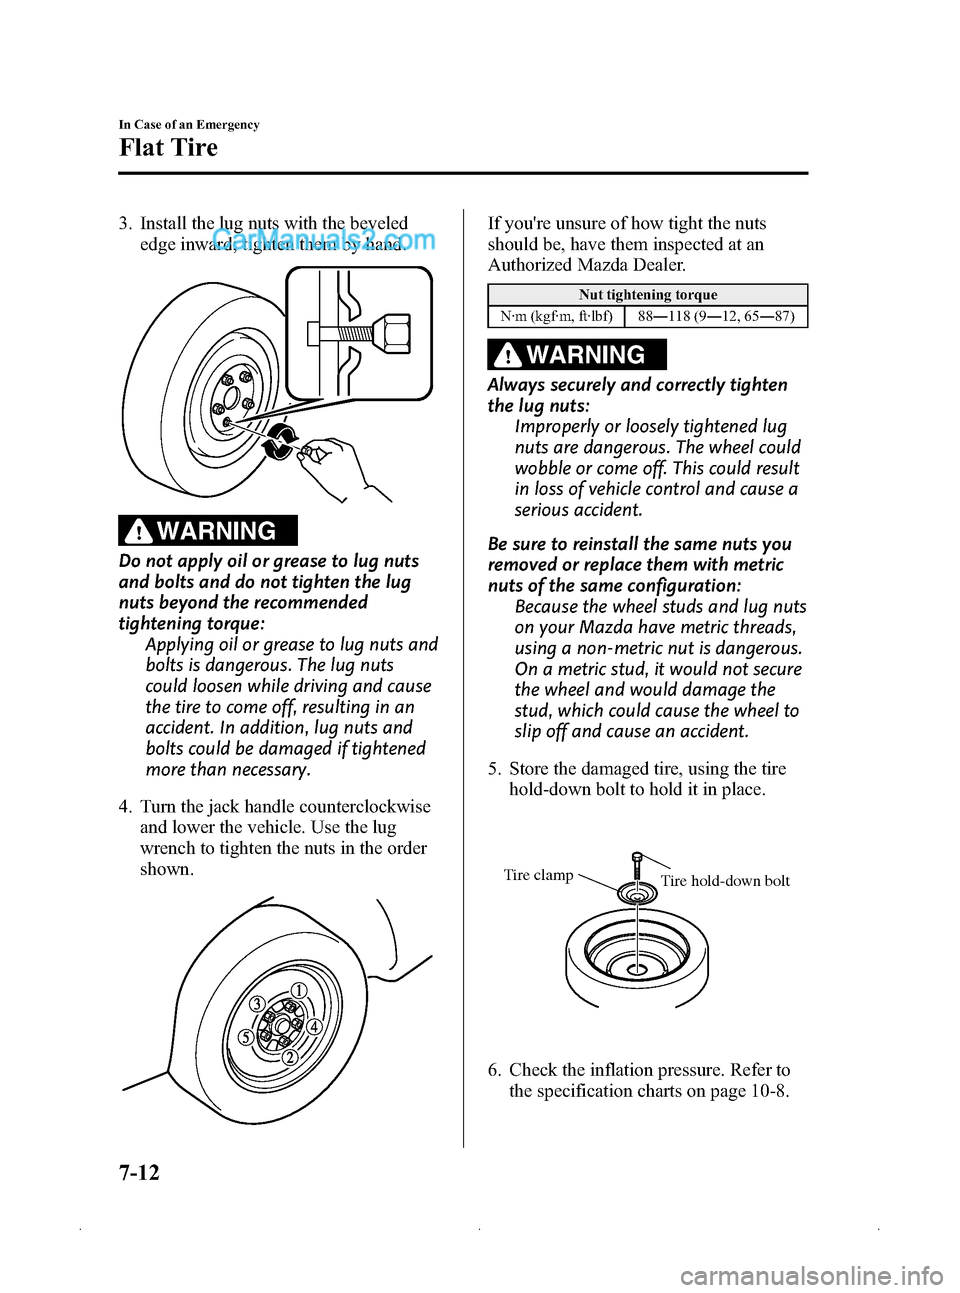 MAZDA MODEL MAZDASPEED 3 2009  Owners Manual (in English) Black plate (274,1)
3. Install the lug nuts with the bevelededge inward; tighten them by hand.
WARNING
Do not apply oil or grease to lug nuts
and bolts and do not tighten the lug
nuts beyond the recom